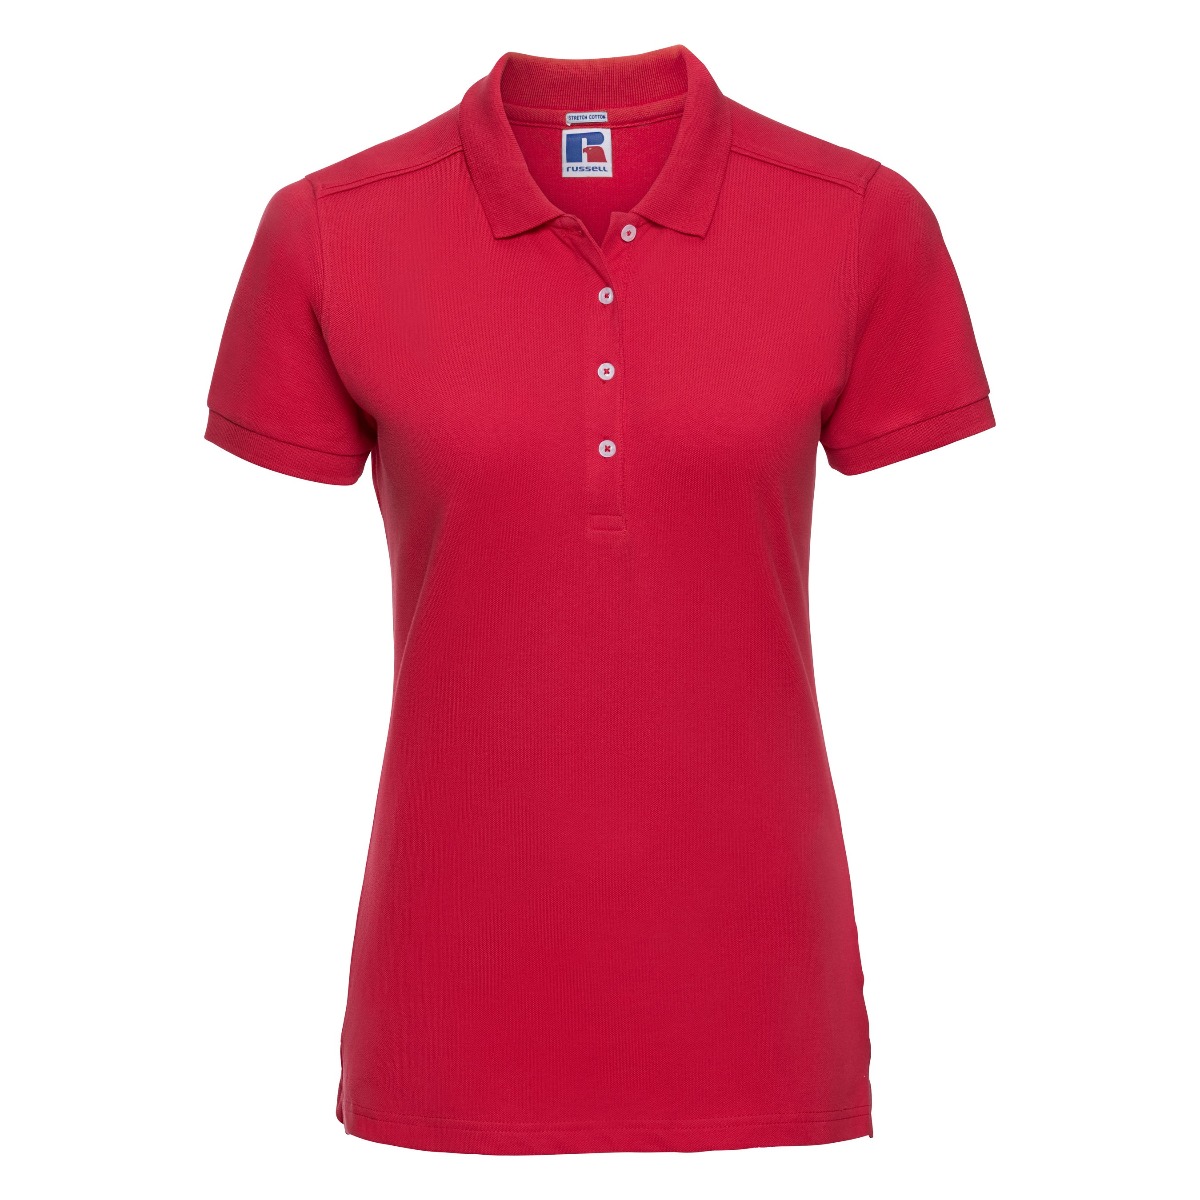 ax-httpswebsystems.s3.amazonaws.comtmp_for_downloadrussell-womens-stretch-classic-red_3.jpg